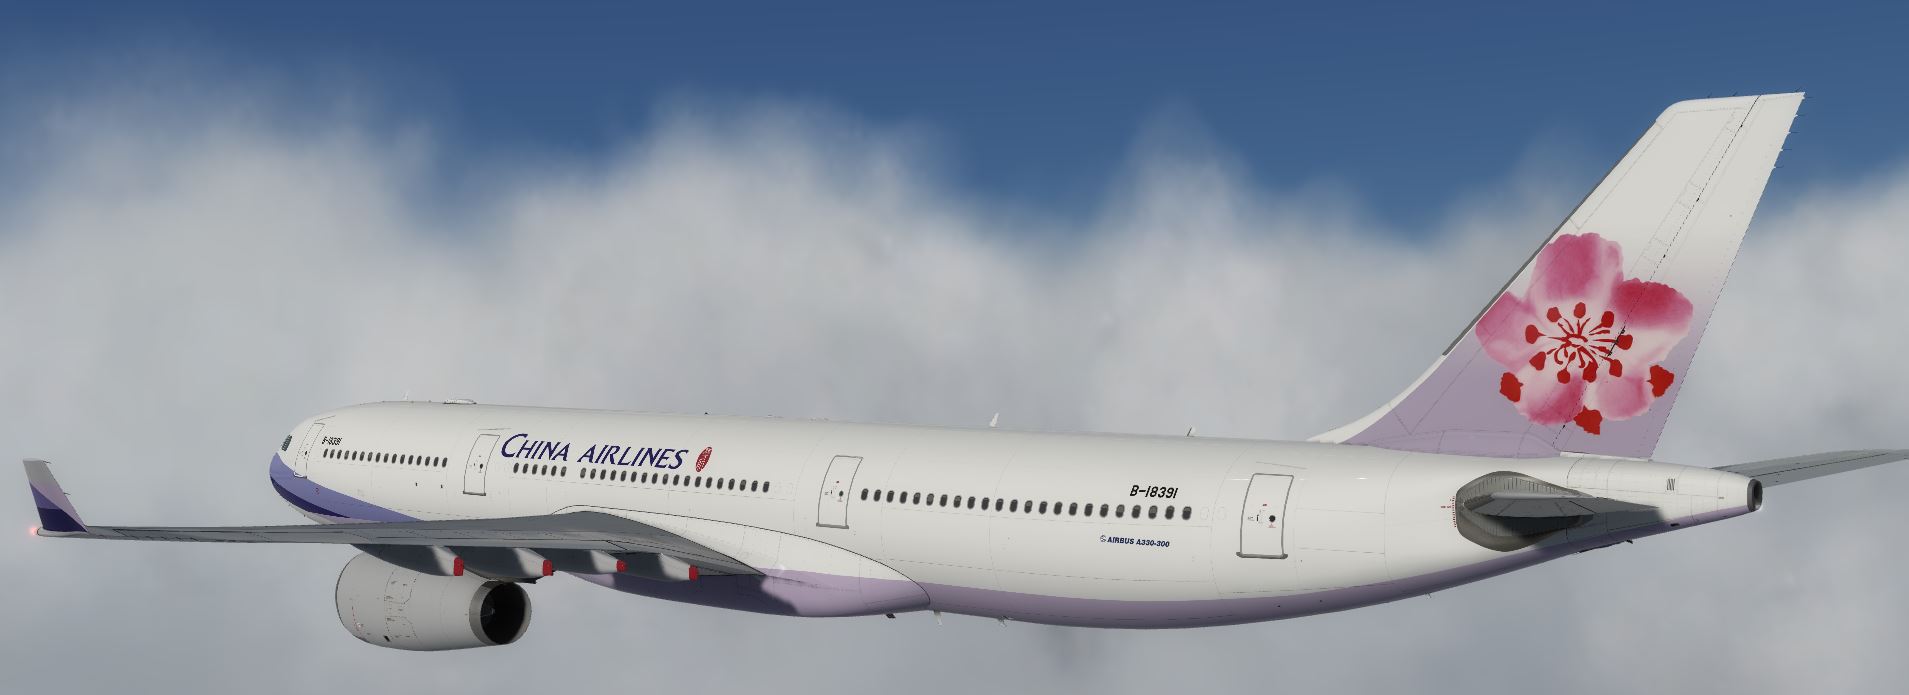 AS A330 ChinaAirline-4938 